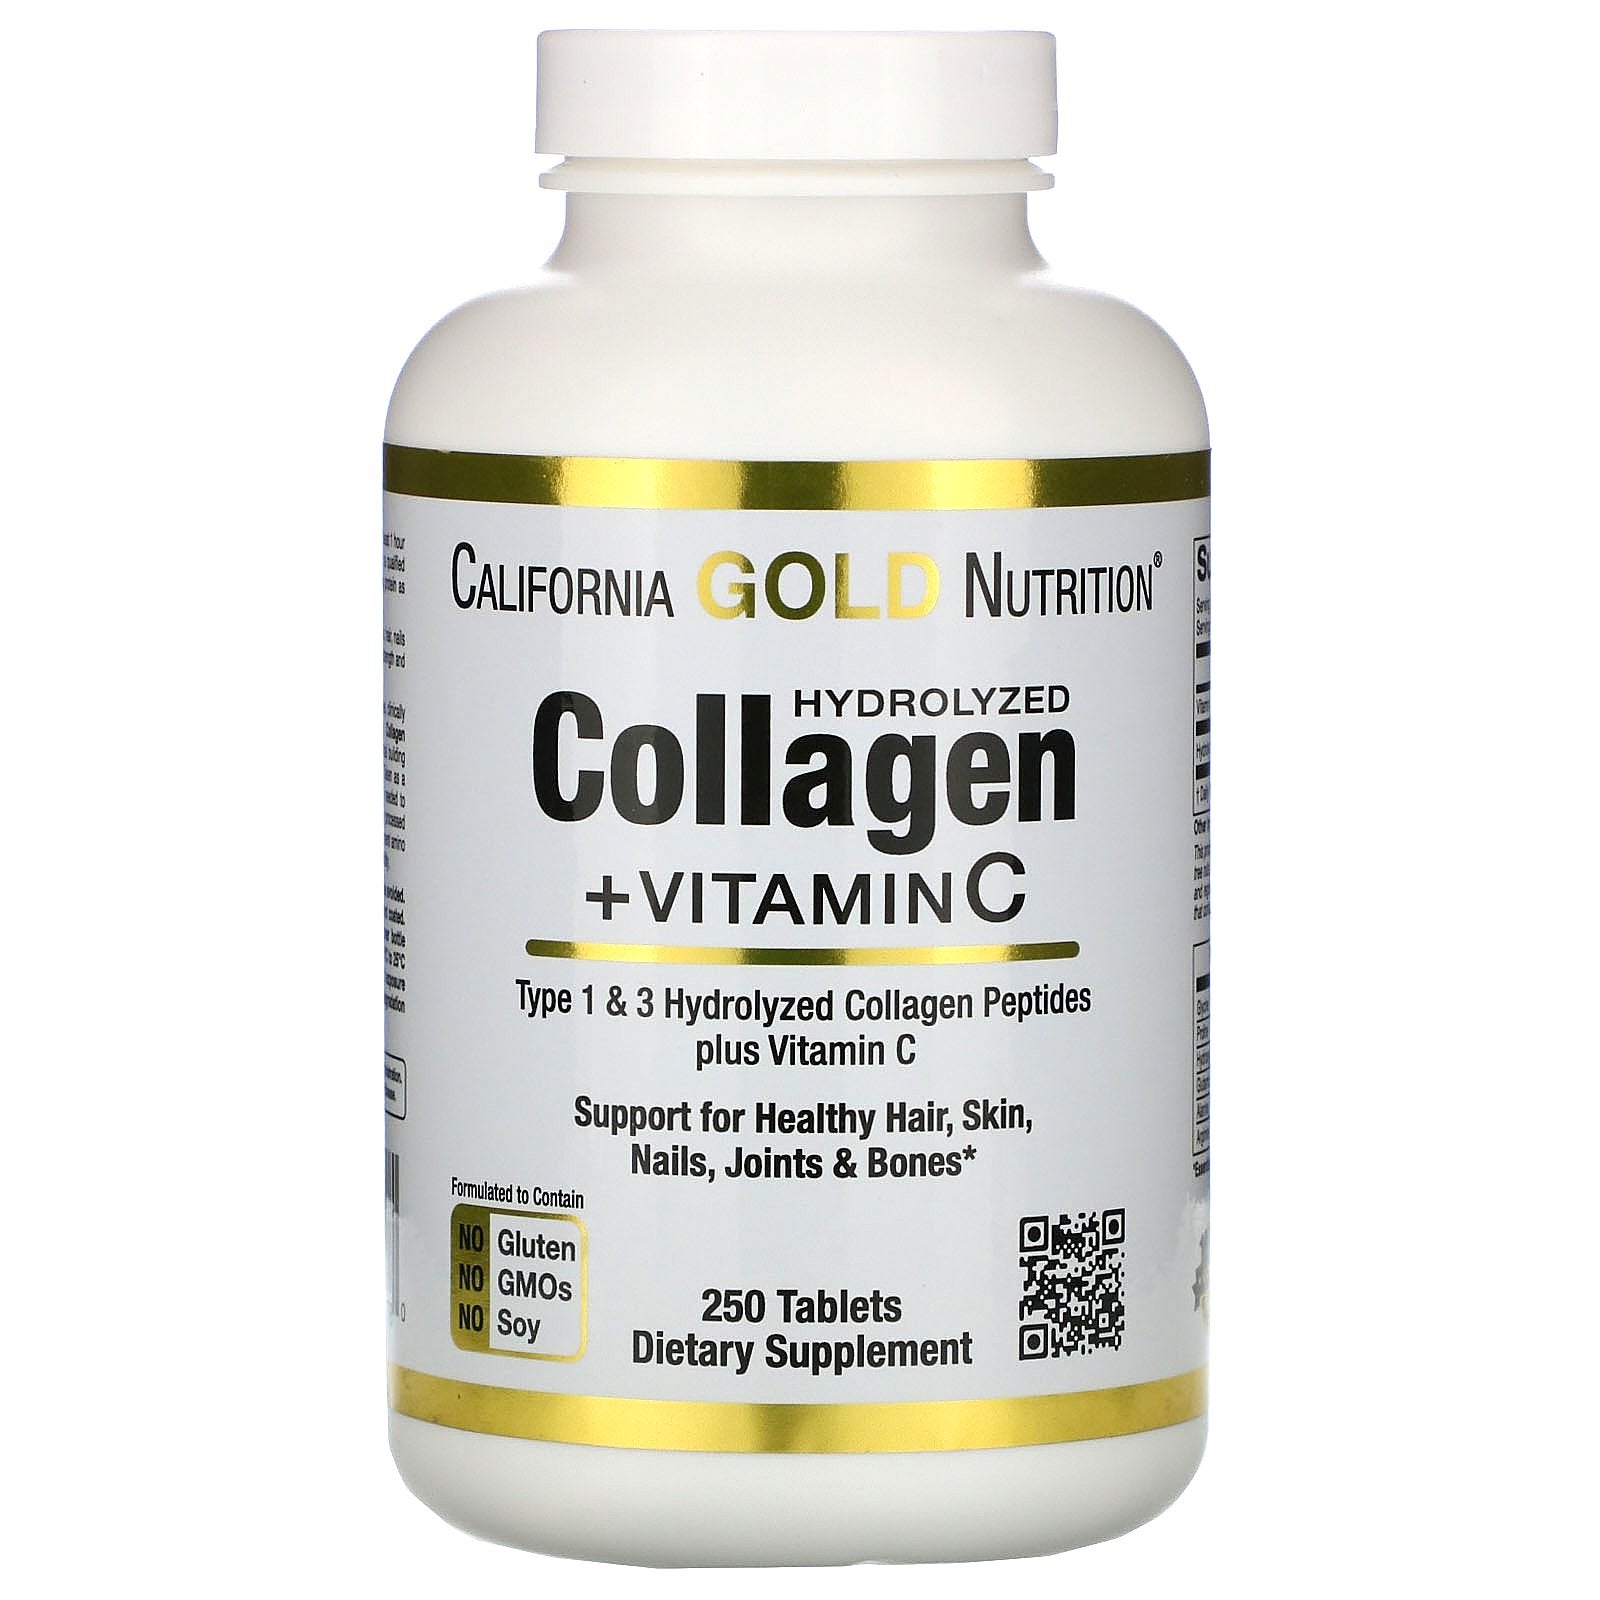 California Gold Nutrition, Hydrolyzed Collagen Peptides + Vitamin C, Type 1 & 3, 250 Tablets